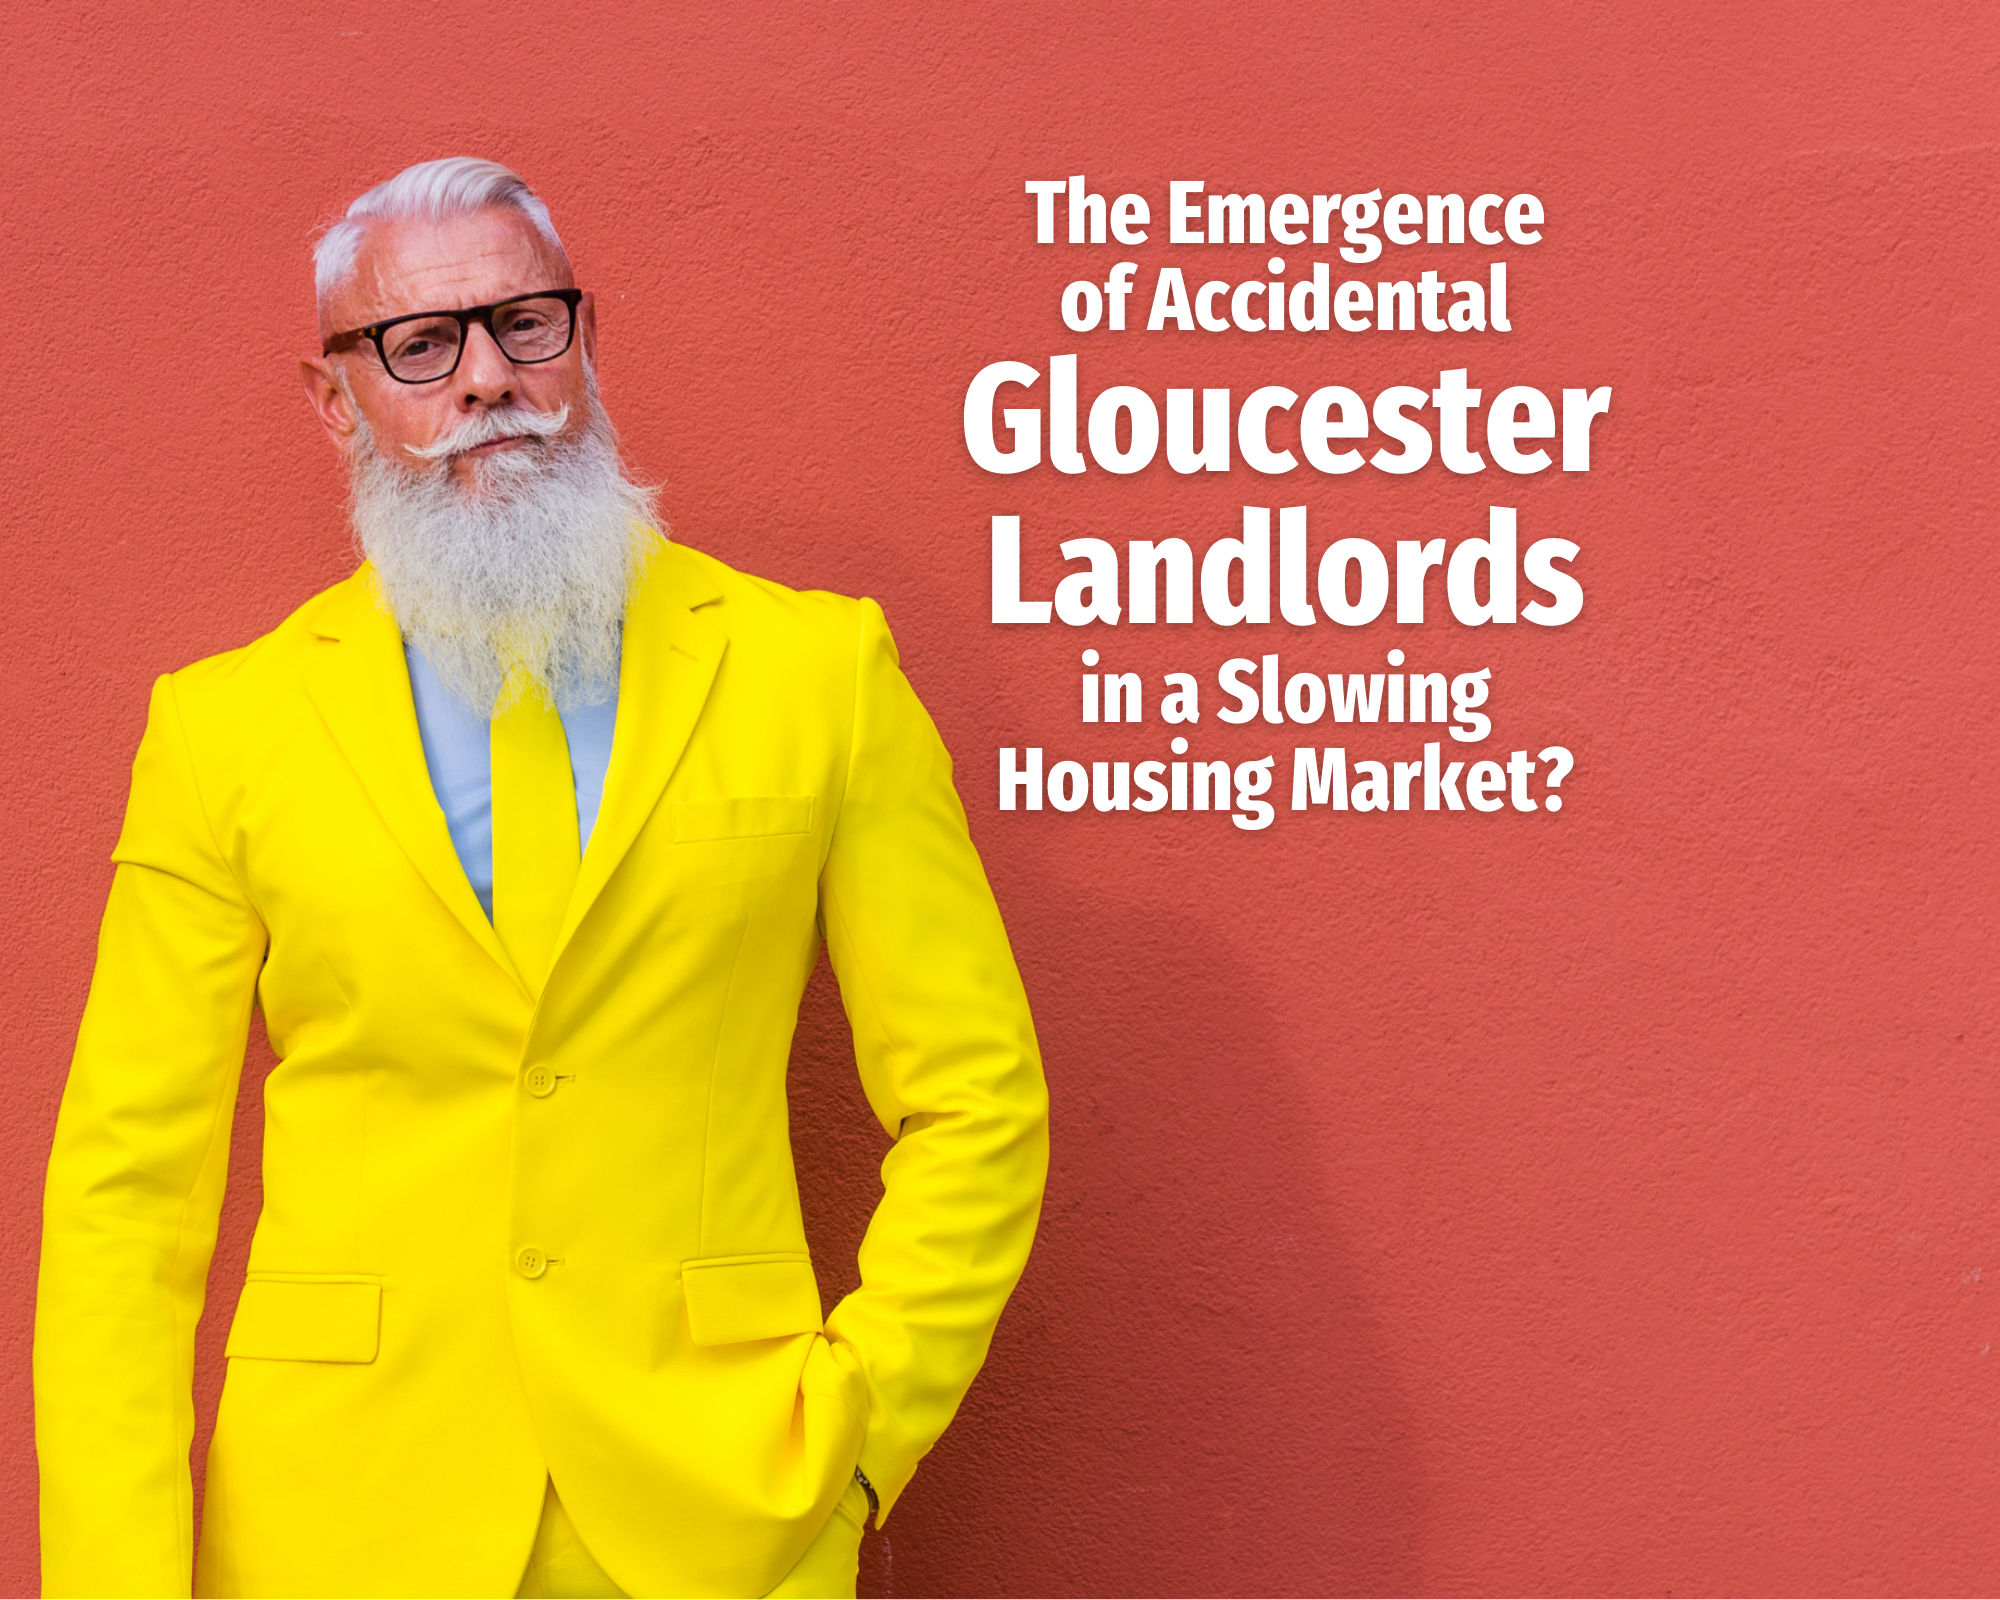 The Emergence of Accidental Gloucester Landlords in a Slowing Housing Market?